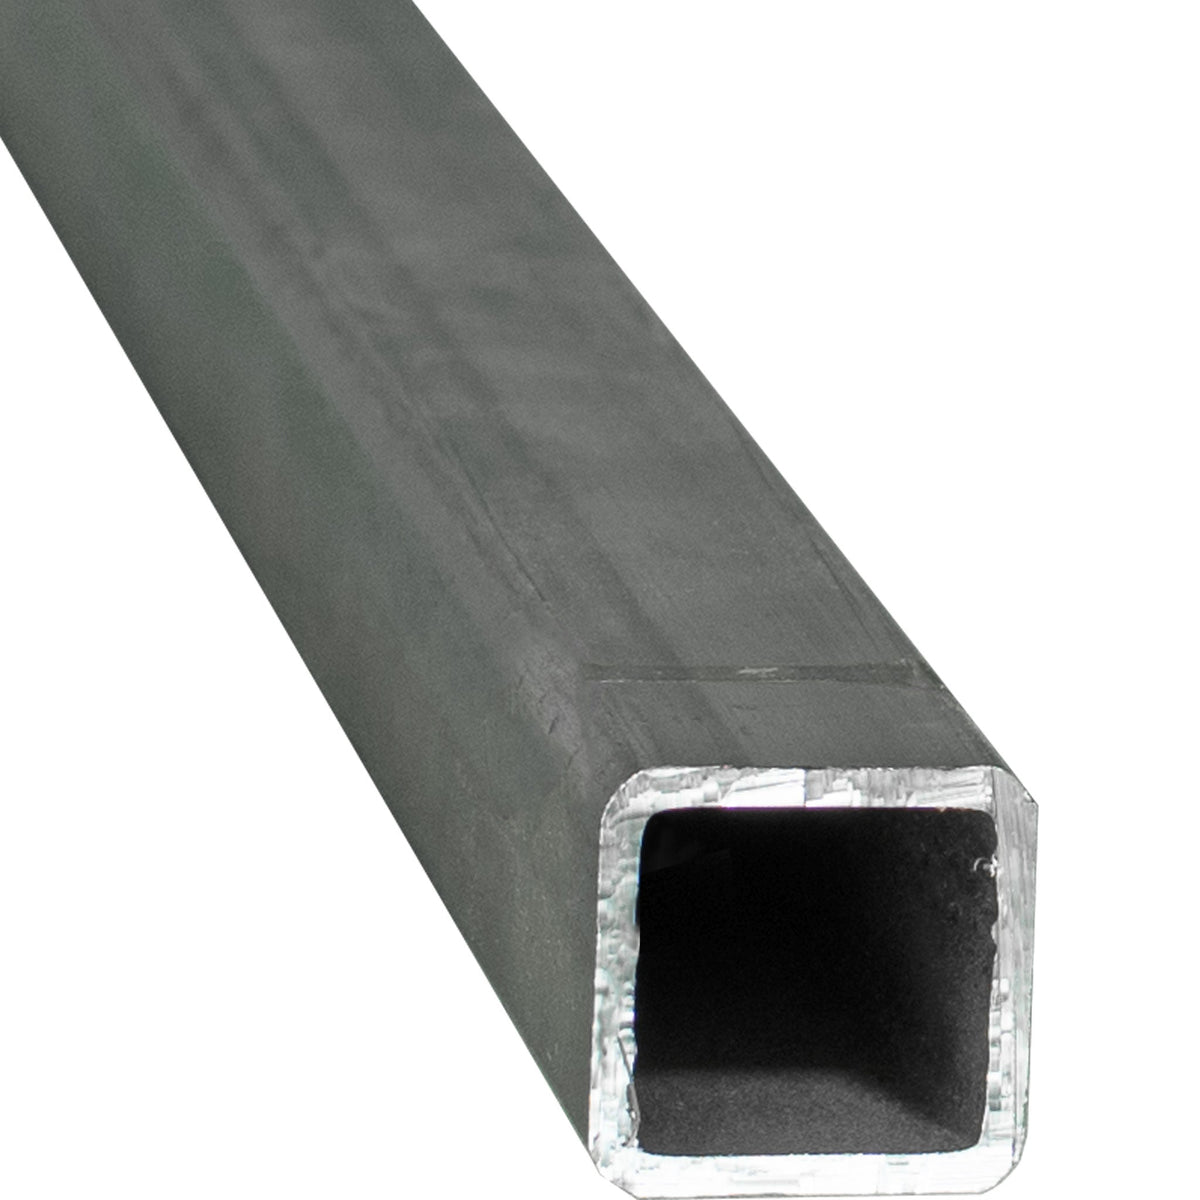 1/8in thick wall American Steel and Metal products sold at leedisplay.com.  Shop now for Square Tubing